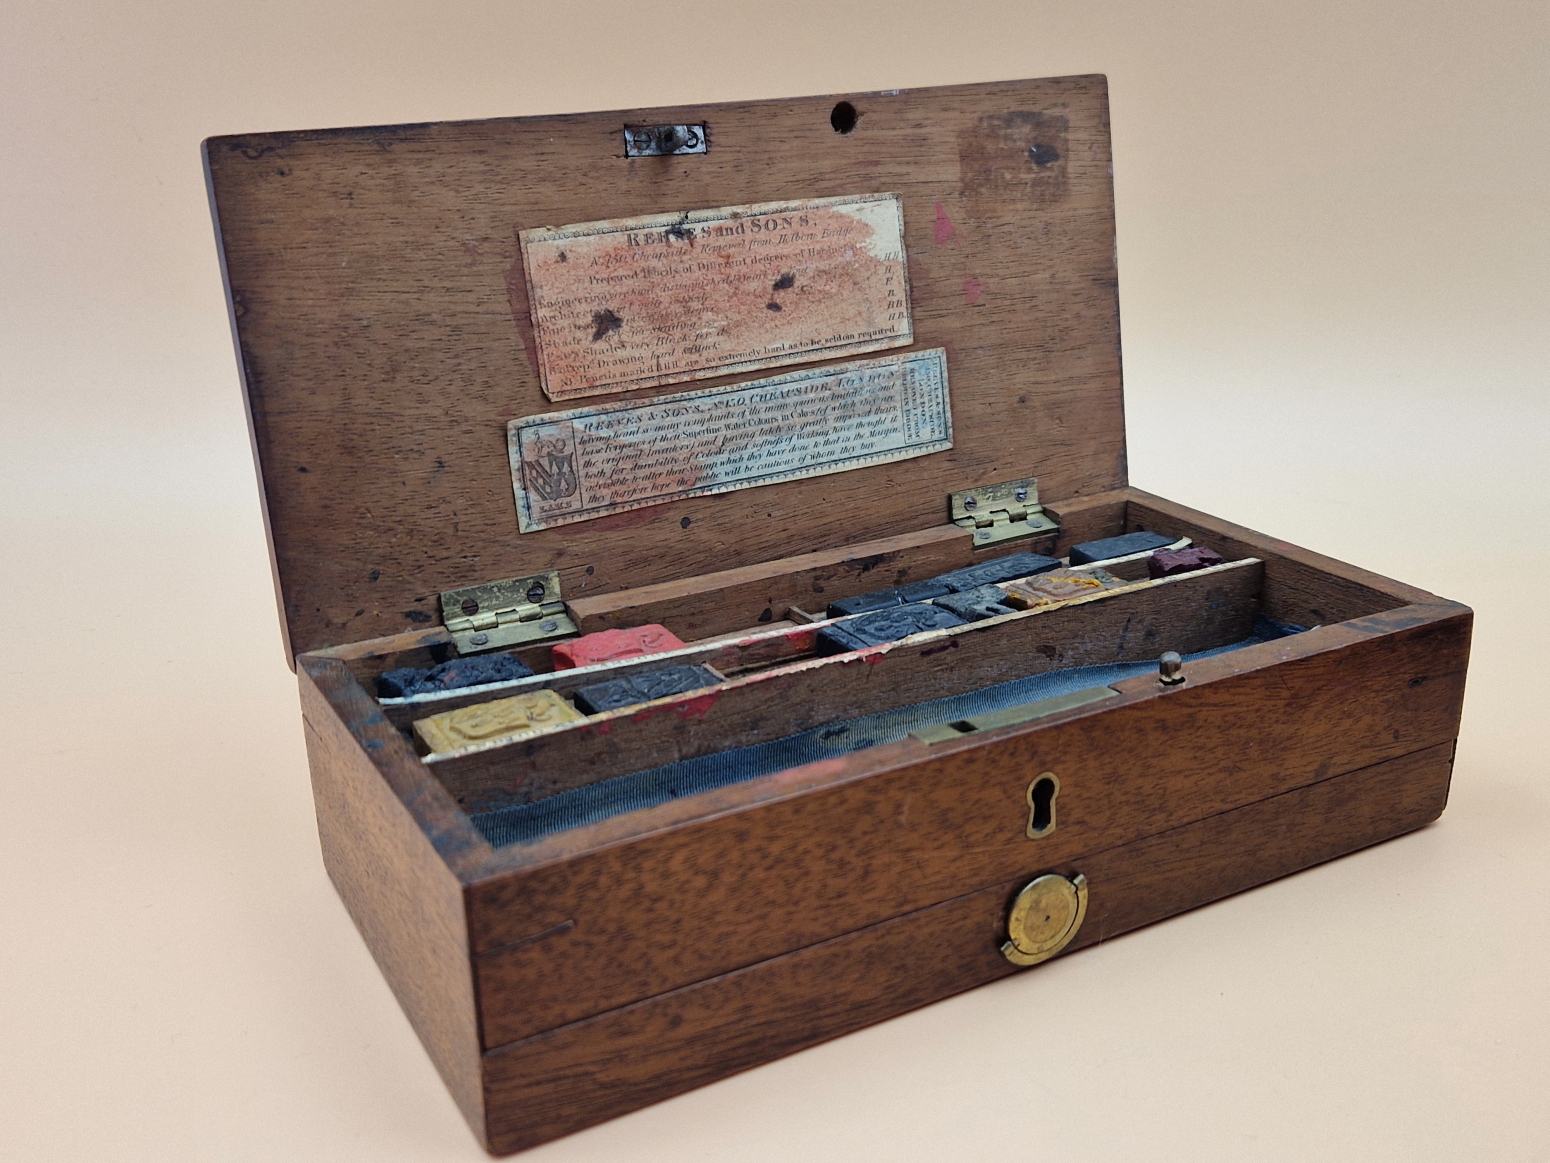 A LATE 19th C. REEVES MAHOGANY PAINT BOX CONTAINING SOME BLOCKS OF UNUSED PAINT AND CERAMIC PALETTES